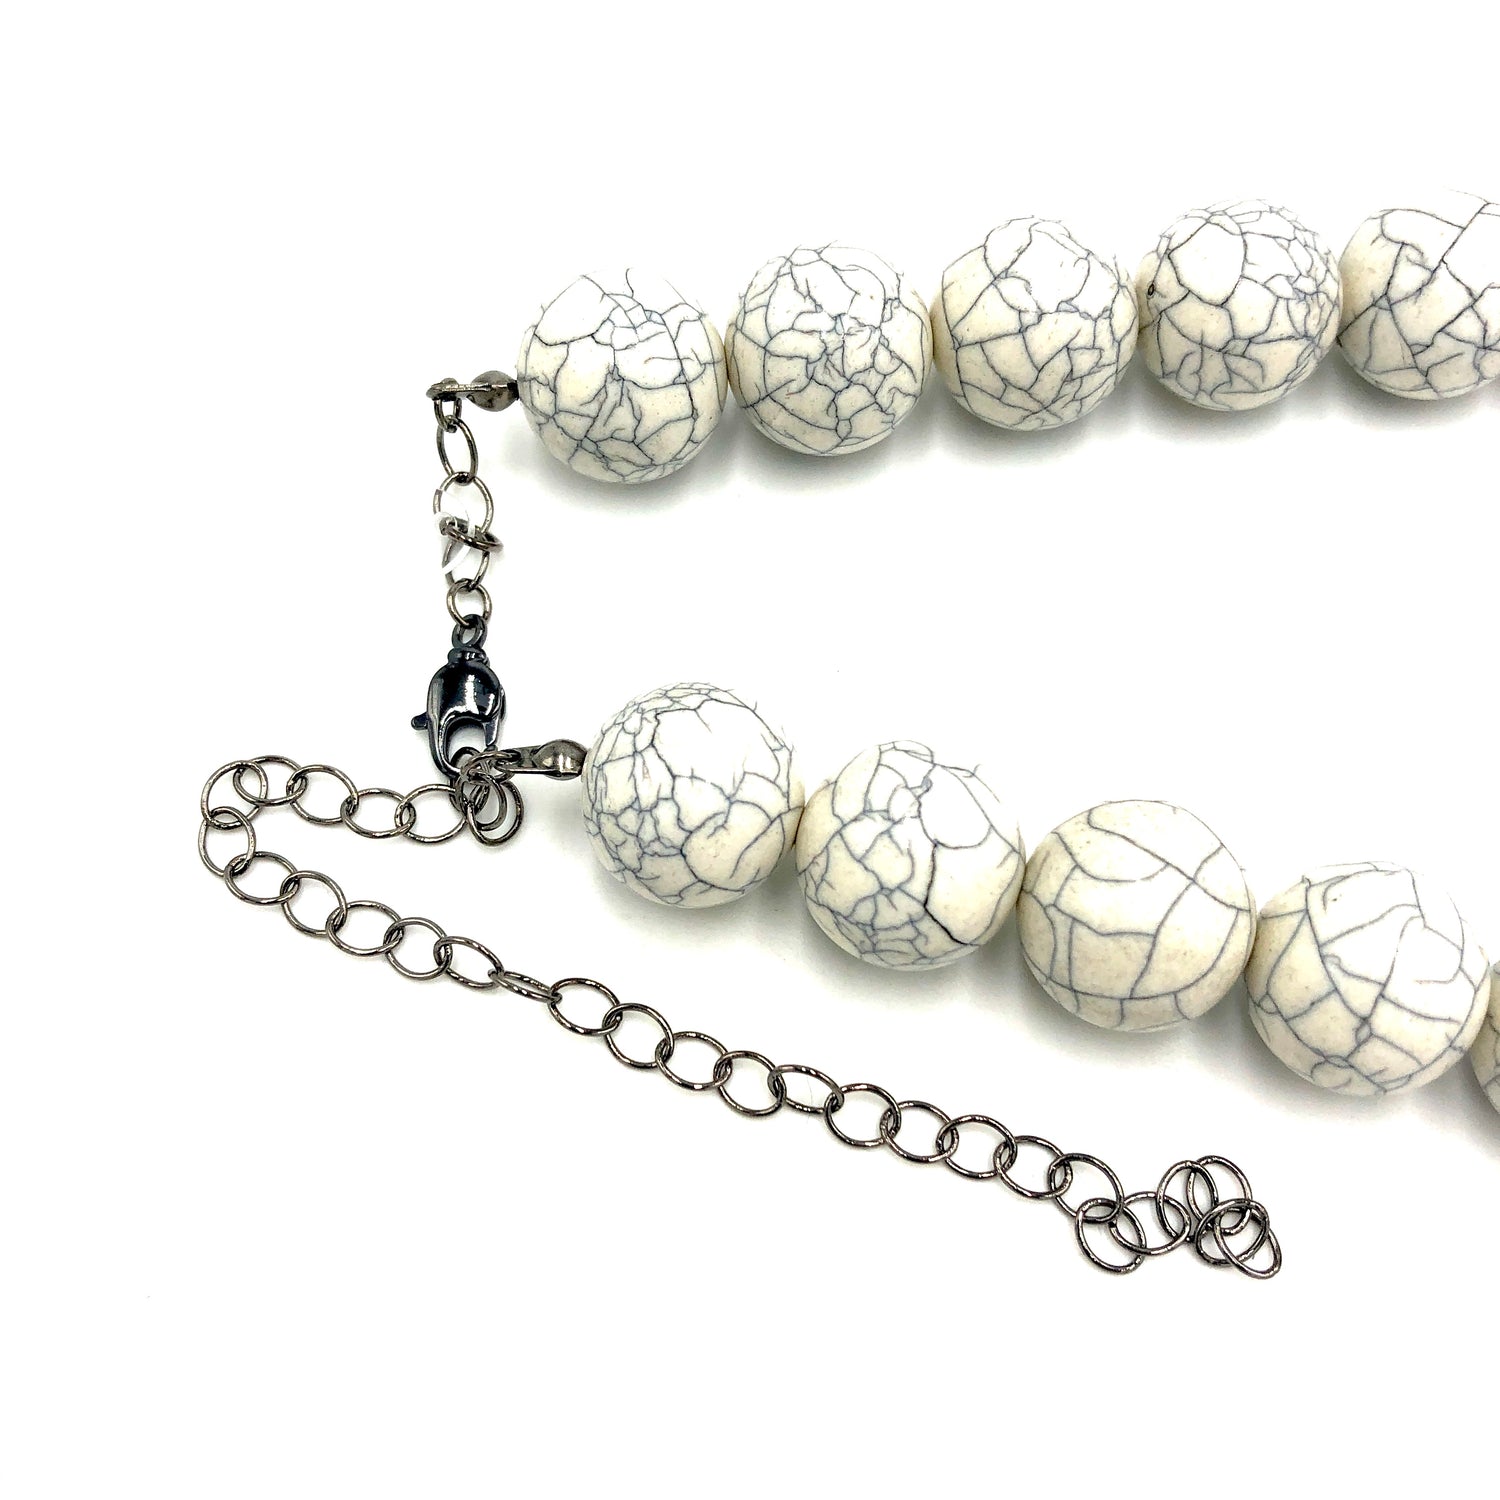 Eggshell Crackle Marco Necklace